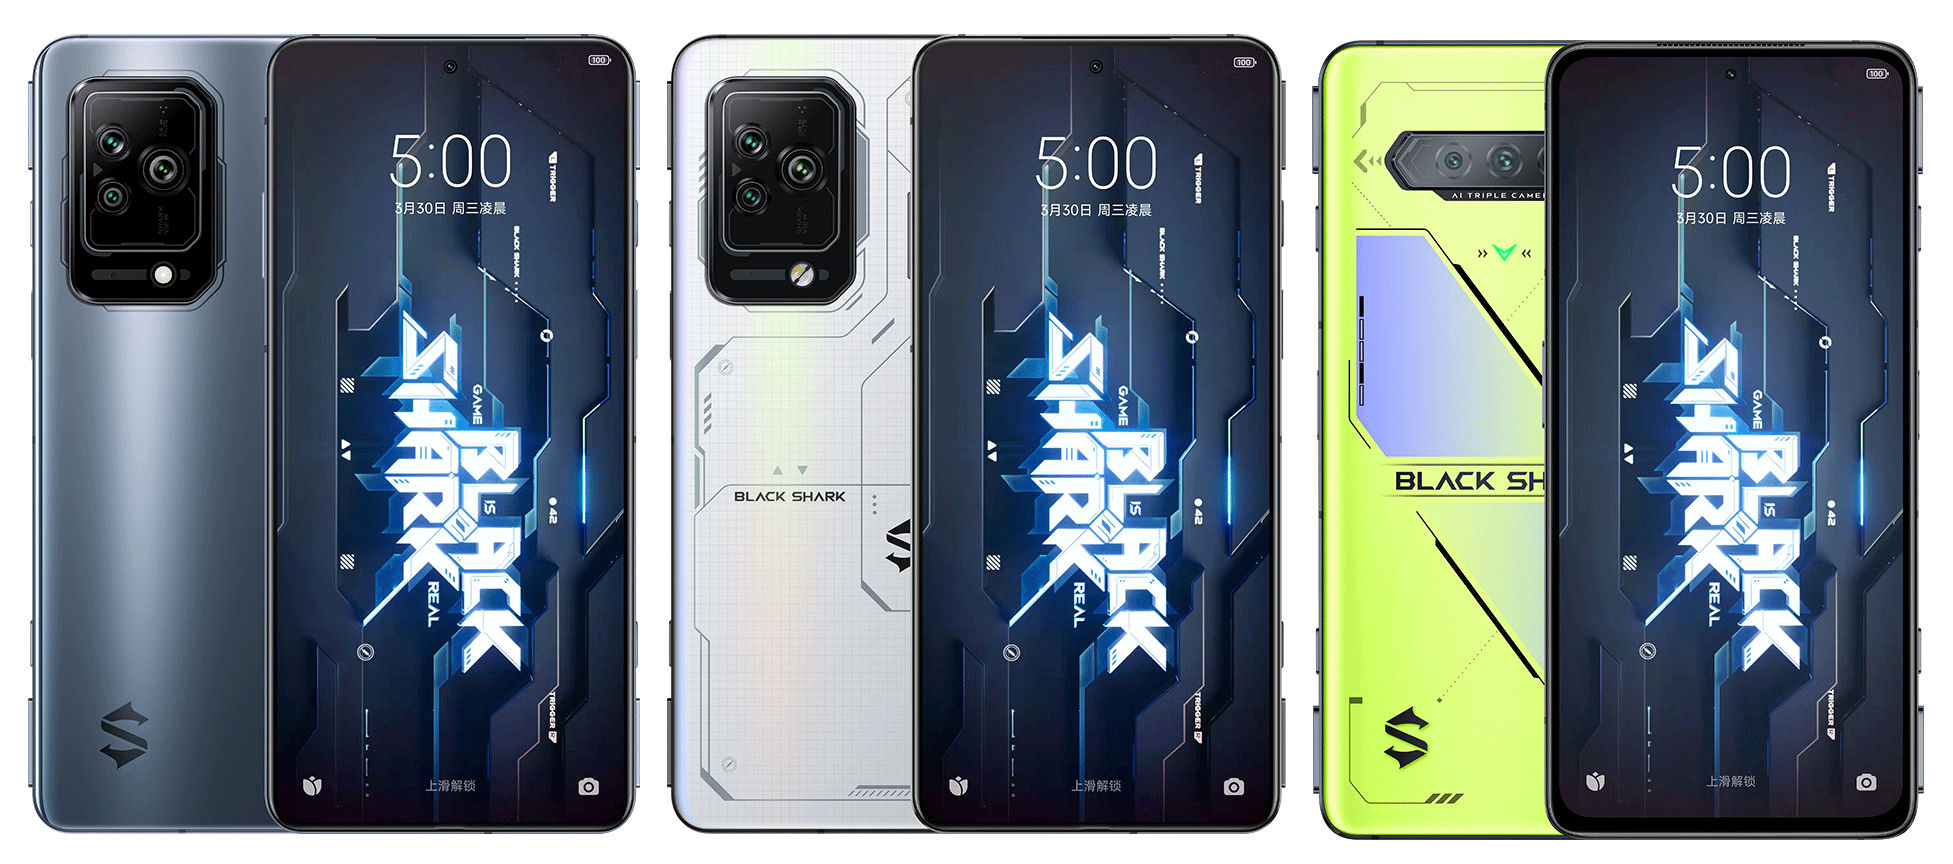 Black Shark 5, Black Shark 5 RS, Black Shark 5 Pro Gaming Smartphones  Launched in China: Price, Specifications